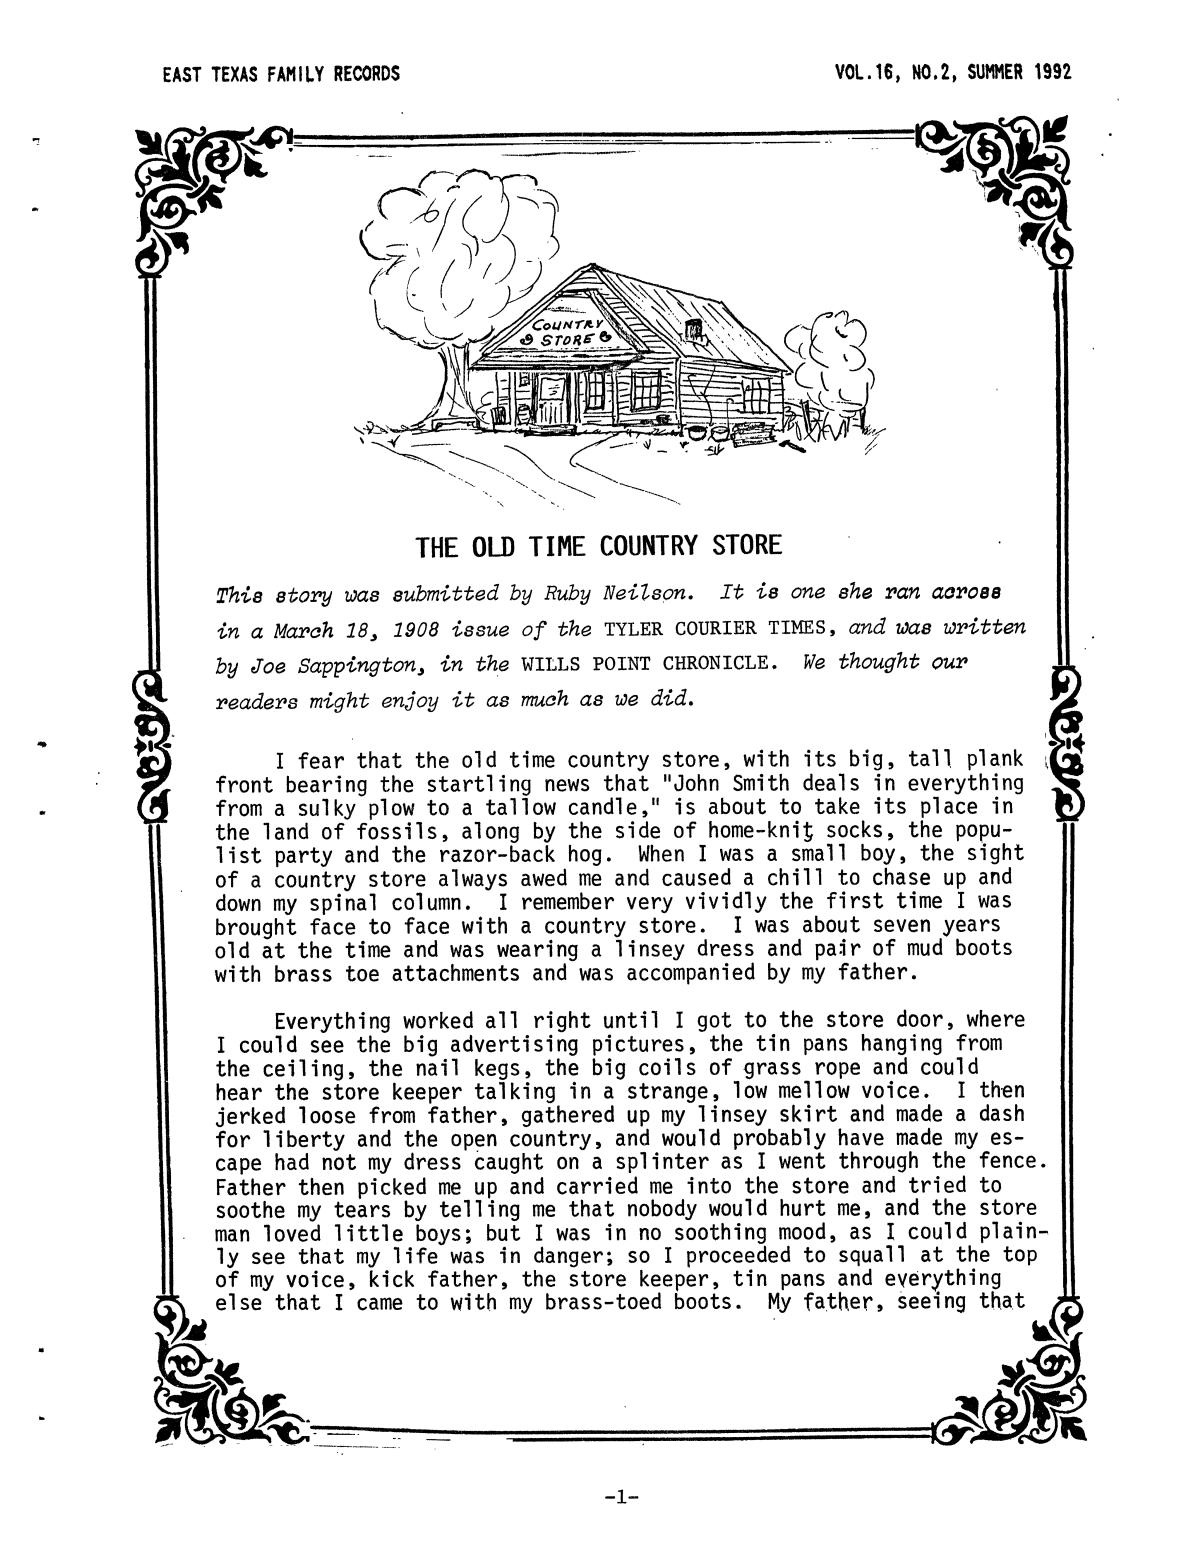 East Texas Family Records, Volume 16, Number 2, Summer 1992
                                                
                                                    1
                                                